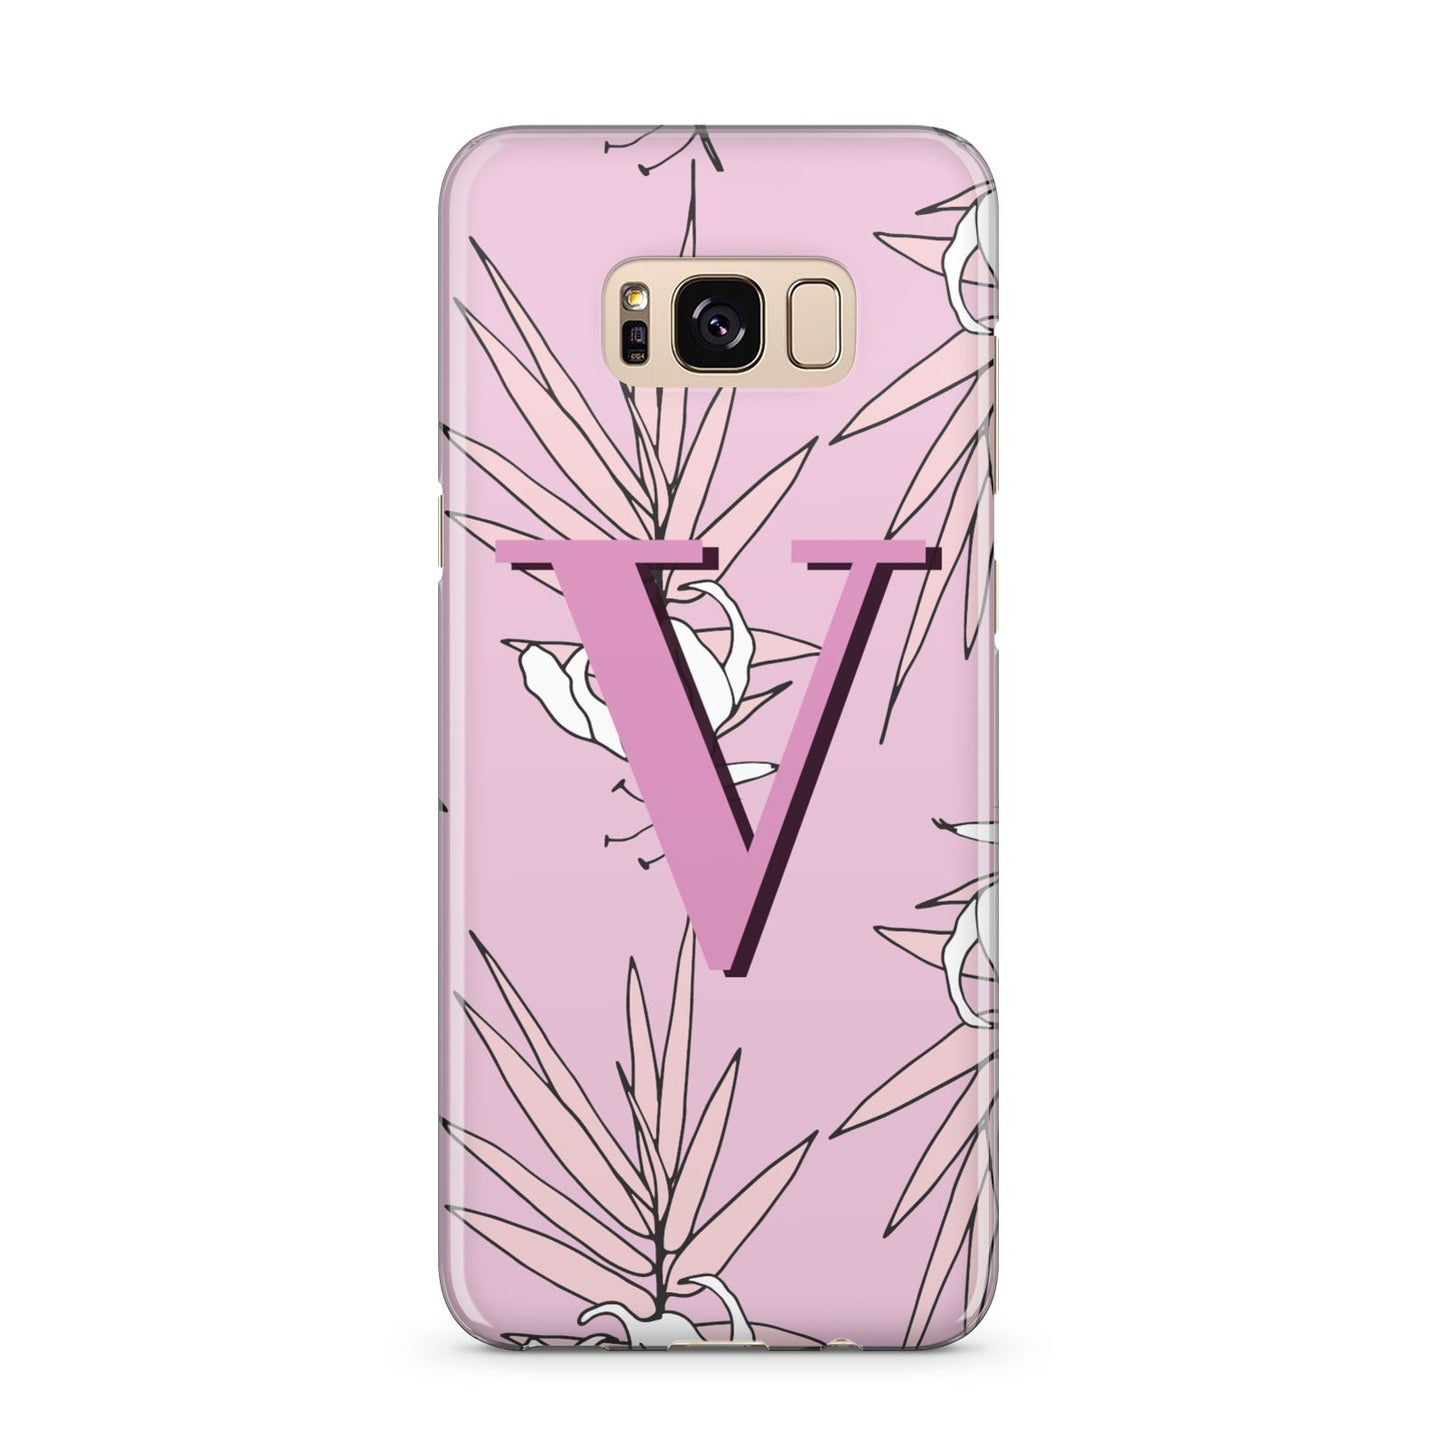 Personalised Pink and White Floral Monogram Samsung Galaxy S8 Plus Case